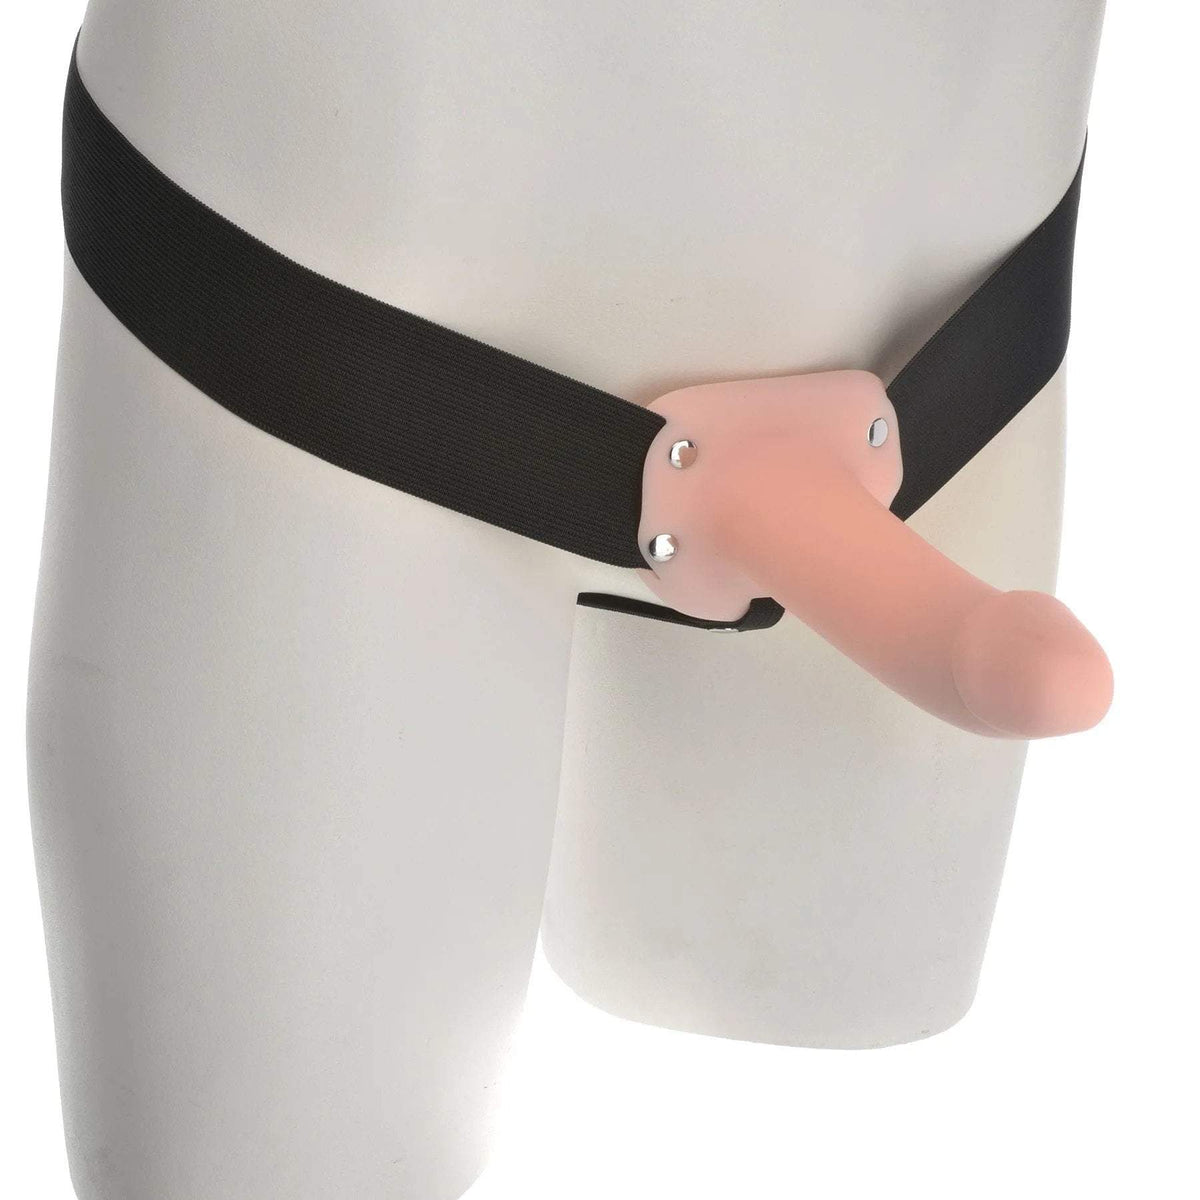 Flexskin Hollow Strap on Penis Extension Sleeve (6.5 inch) by Adams Cock Sheaths